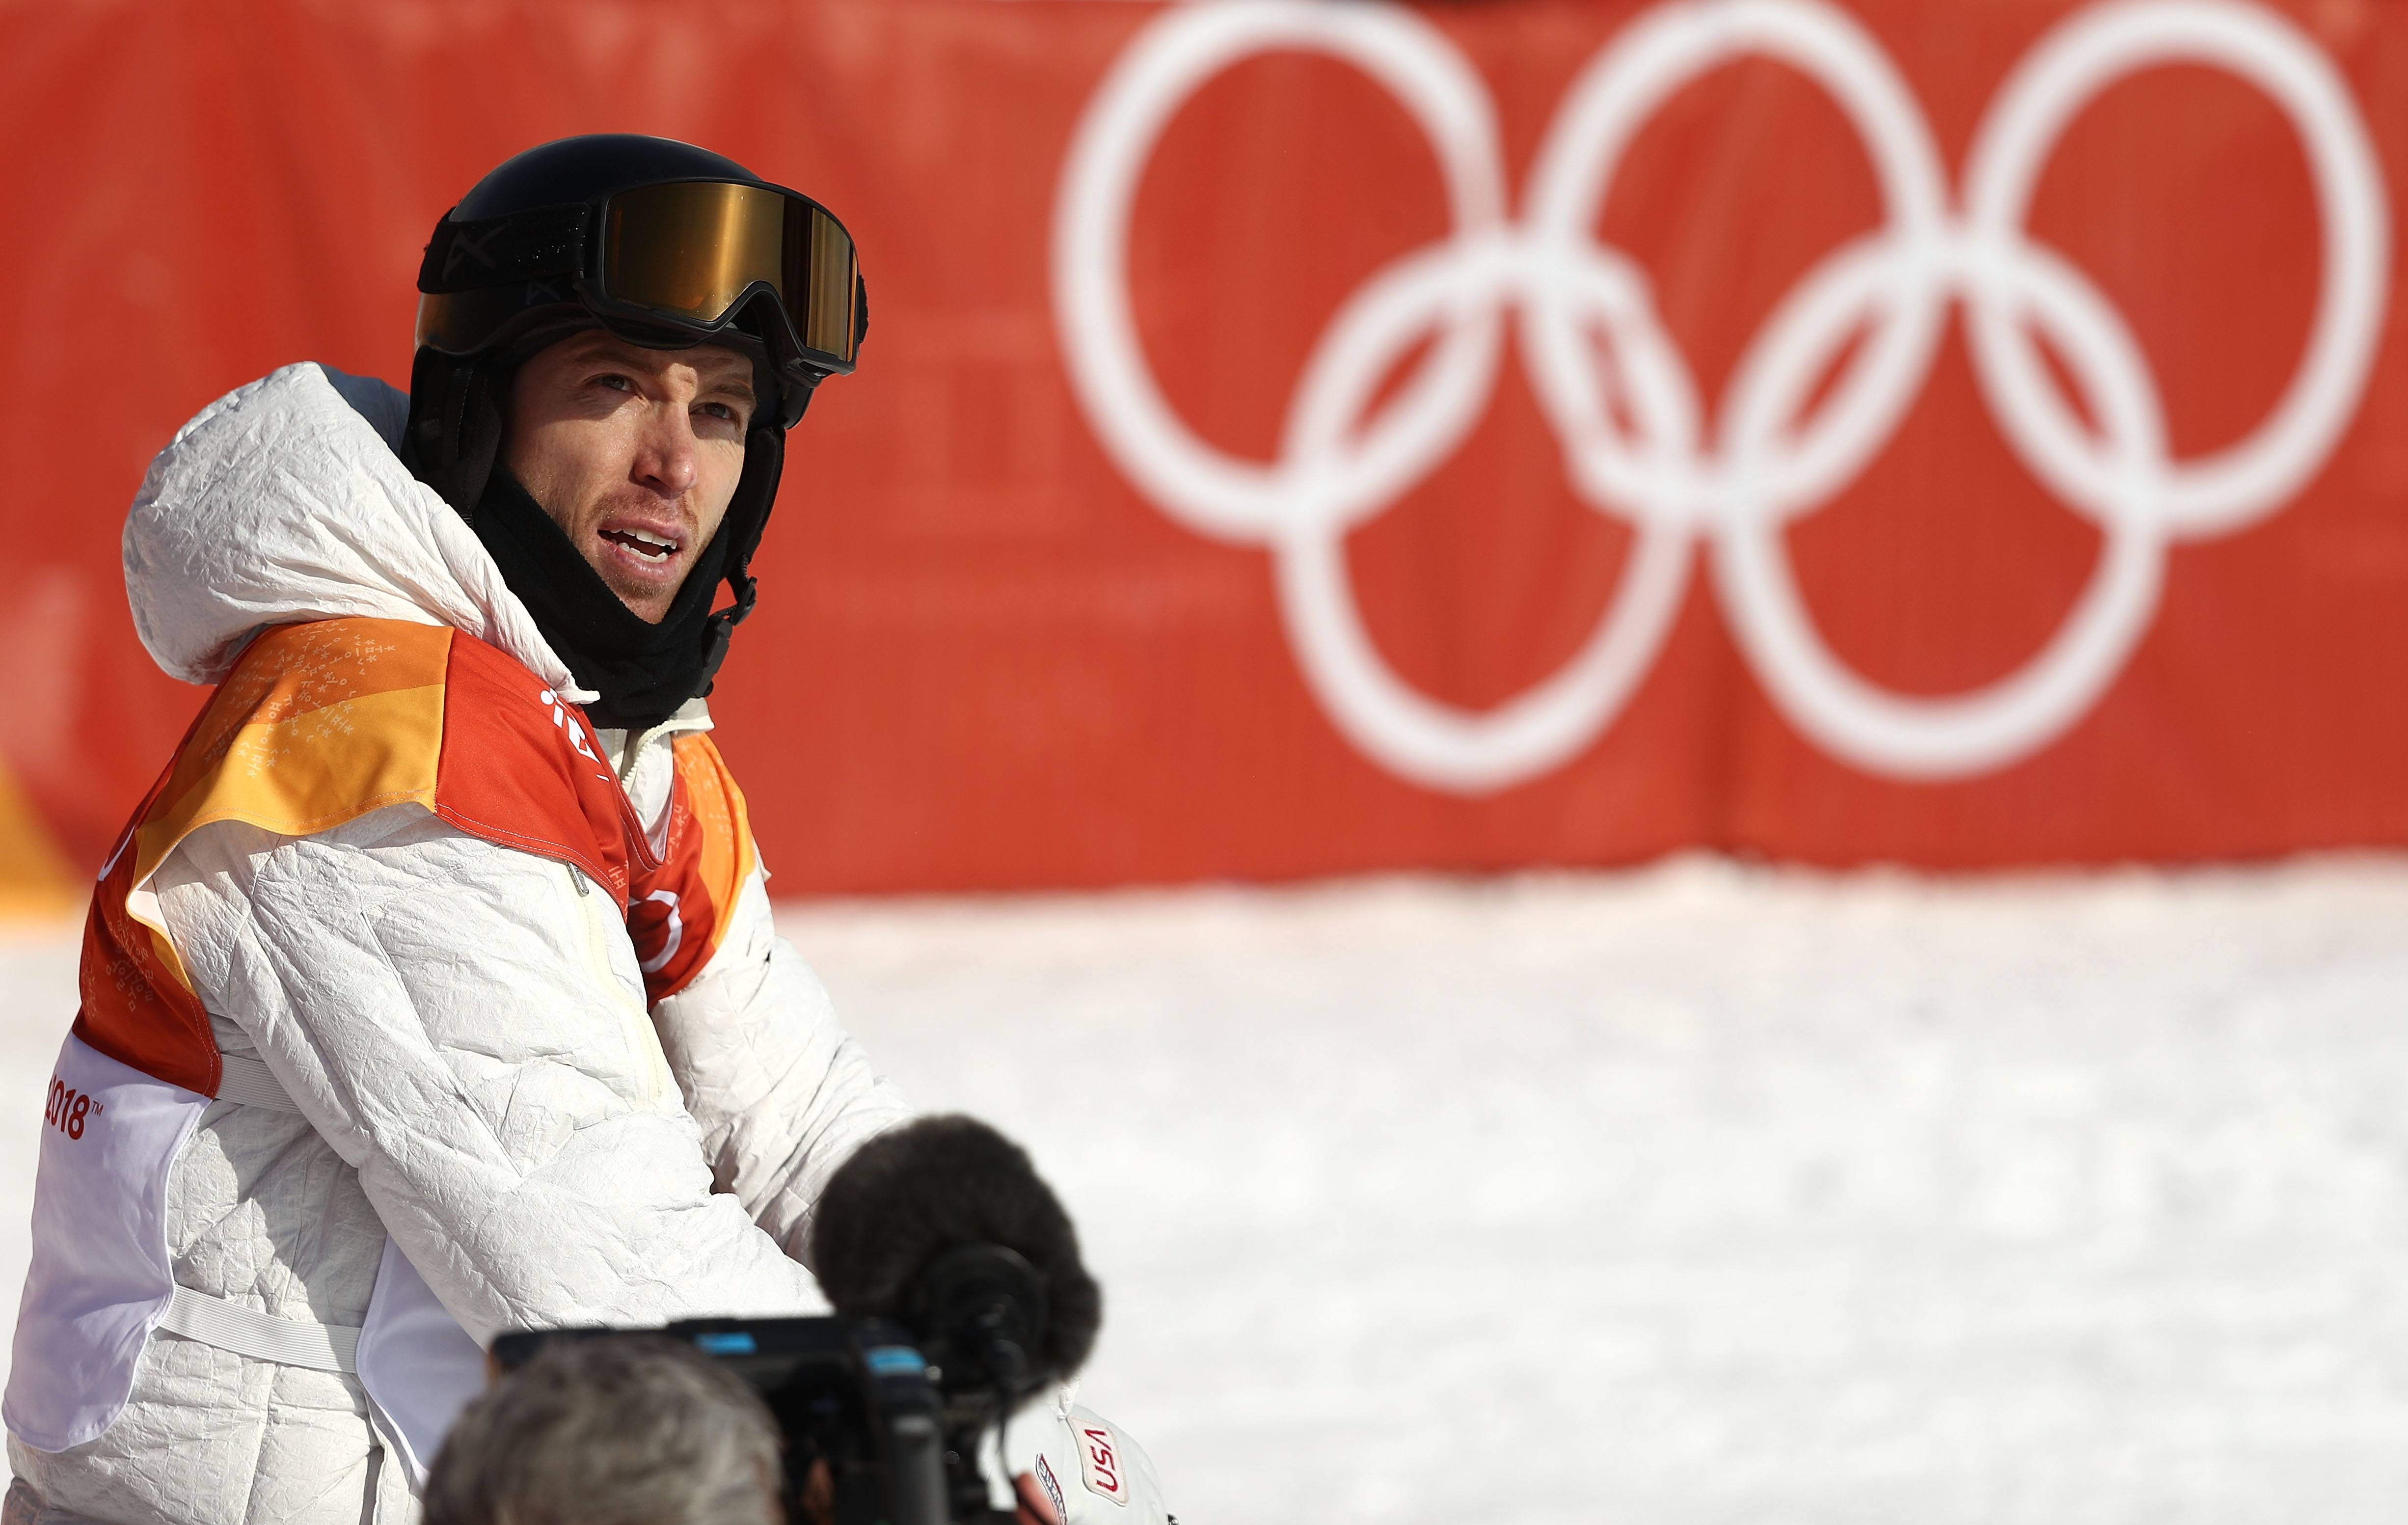 Shaun White of the United States reacts after his run during the Snowboard Men's Halfpipe Qualification on day four